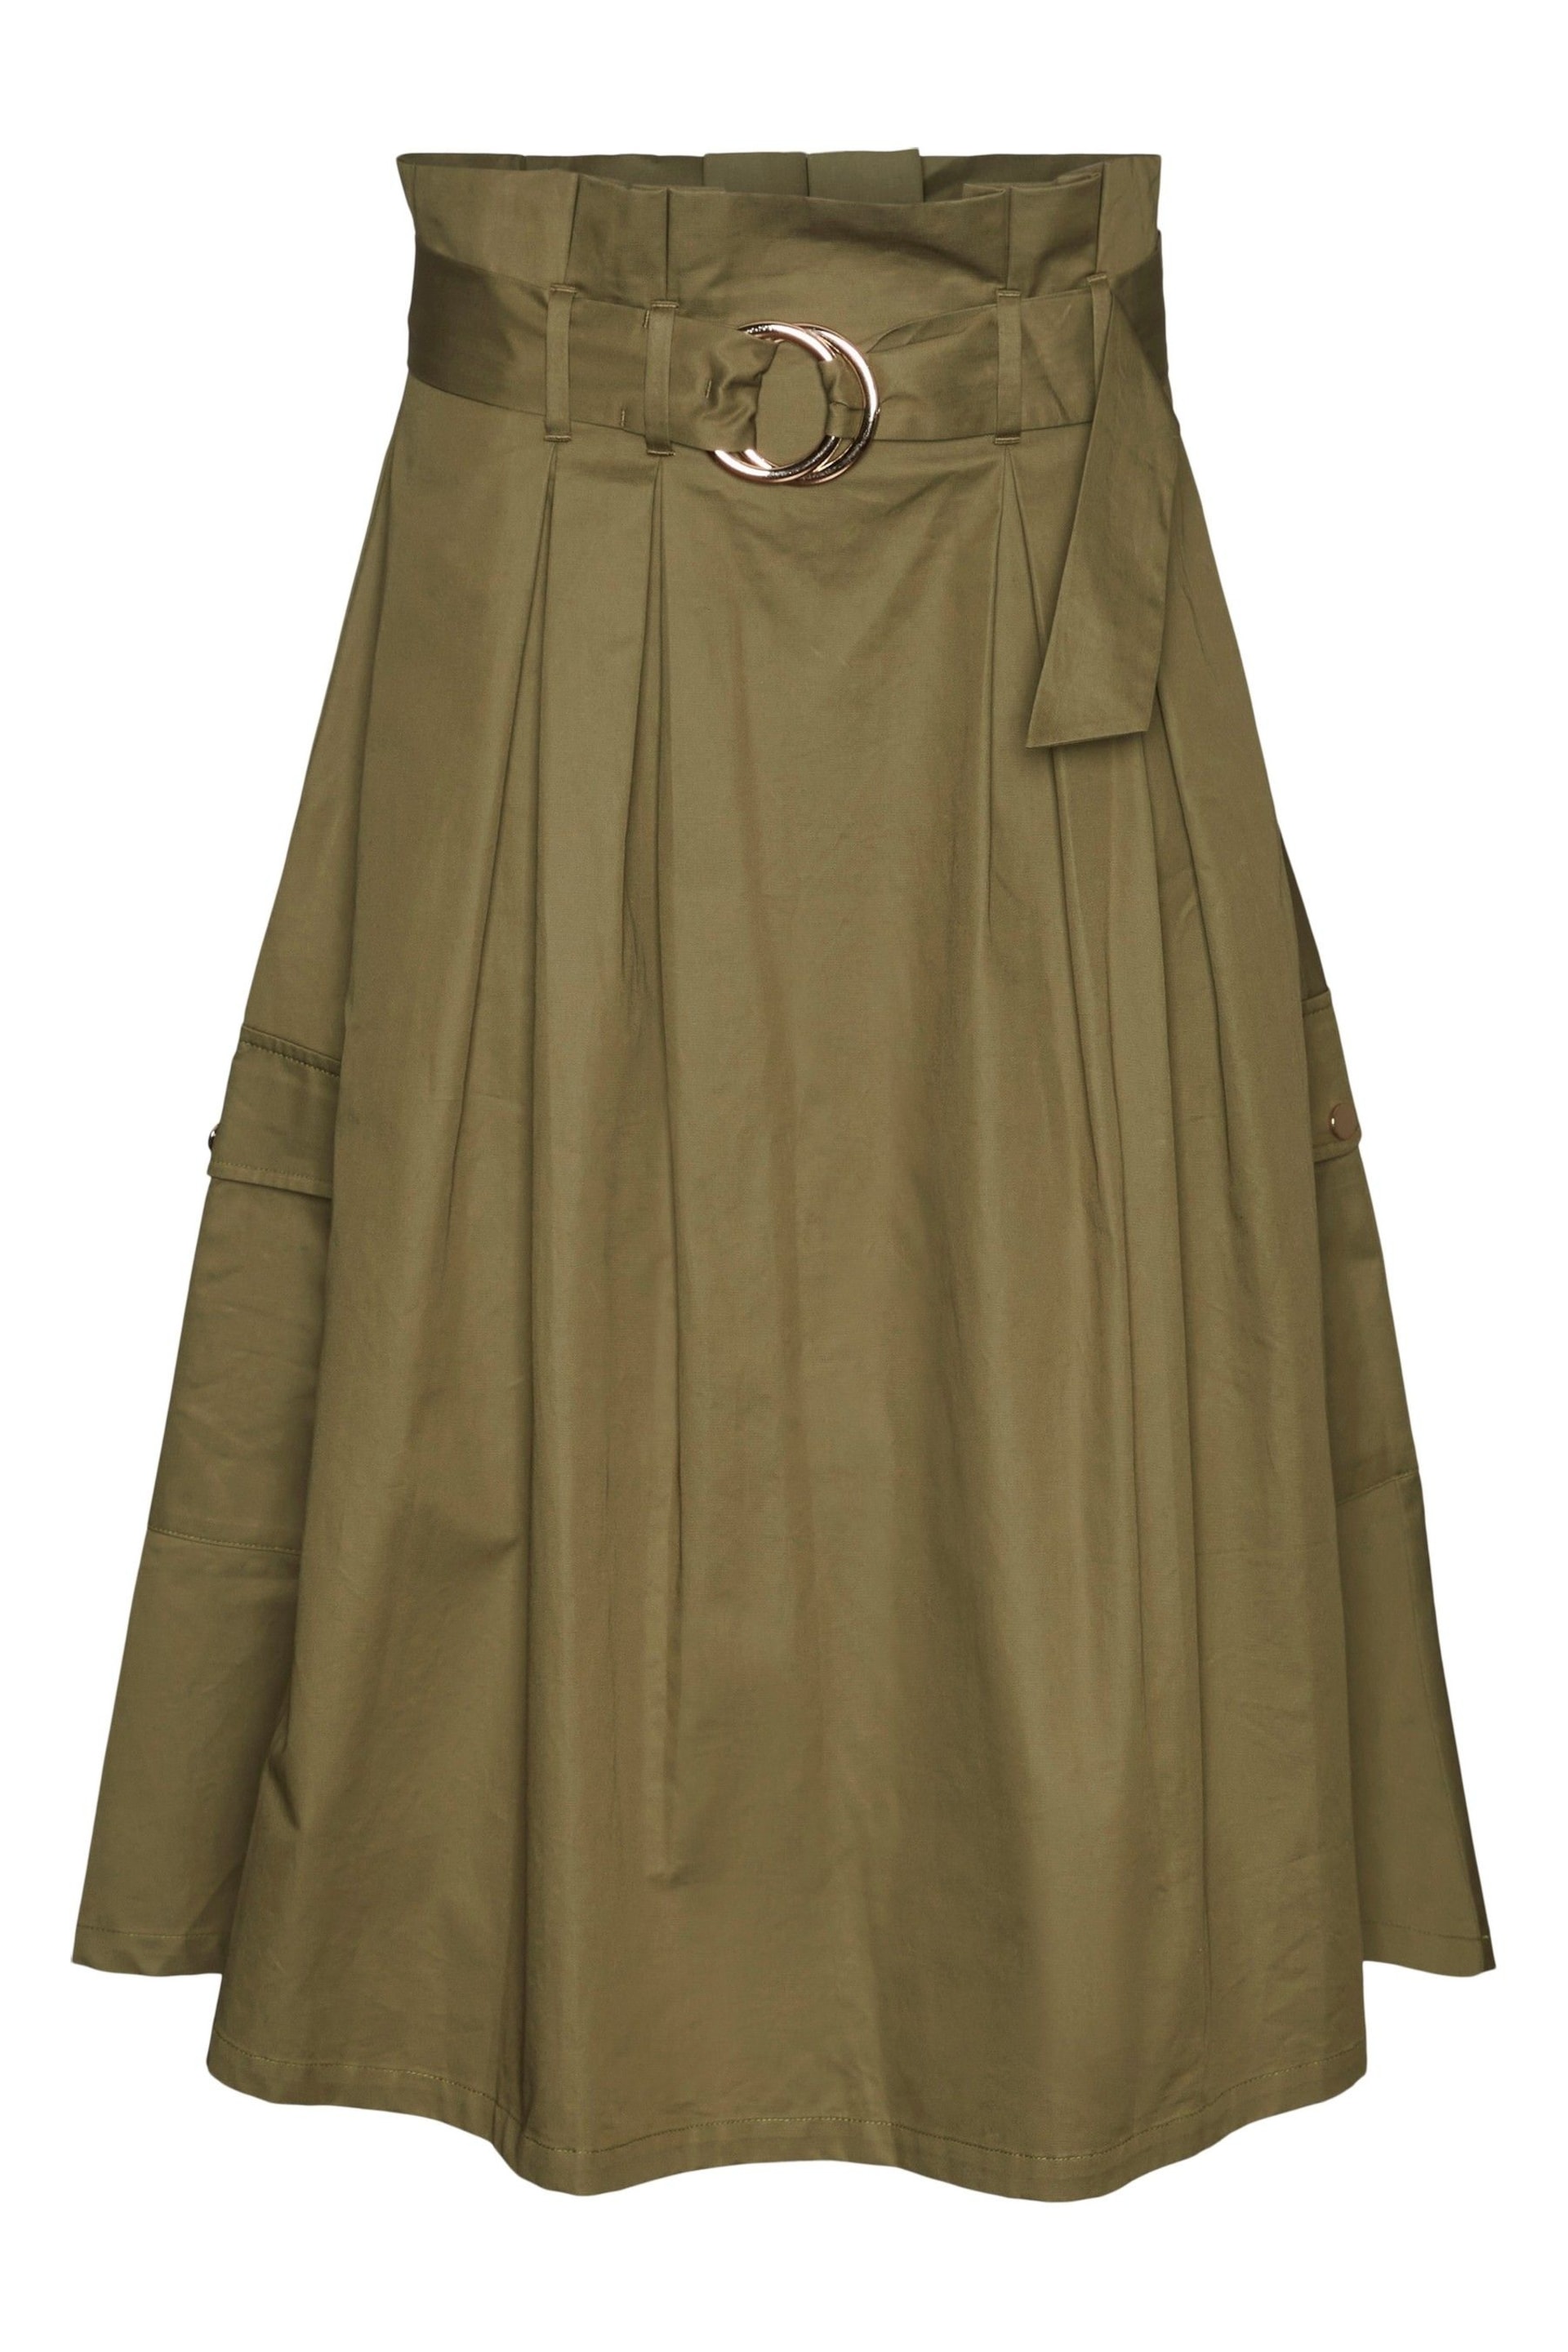 VERO MODA Green Belted A-Line Cargo Utility Midi Skirt - Image 4 of 4